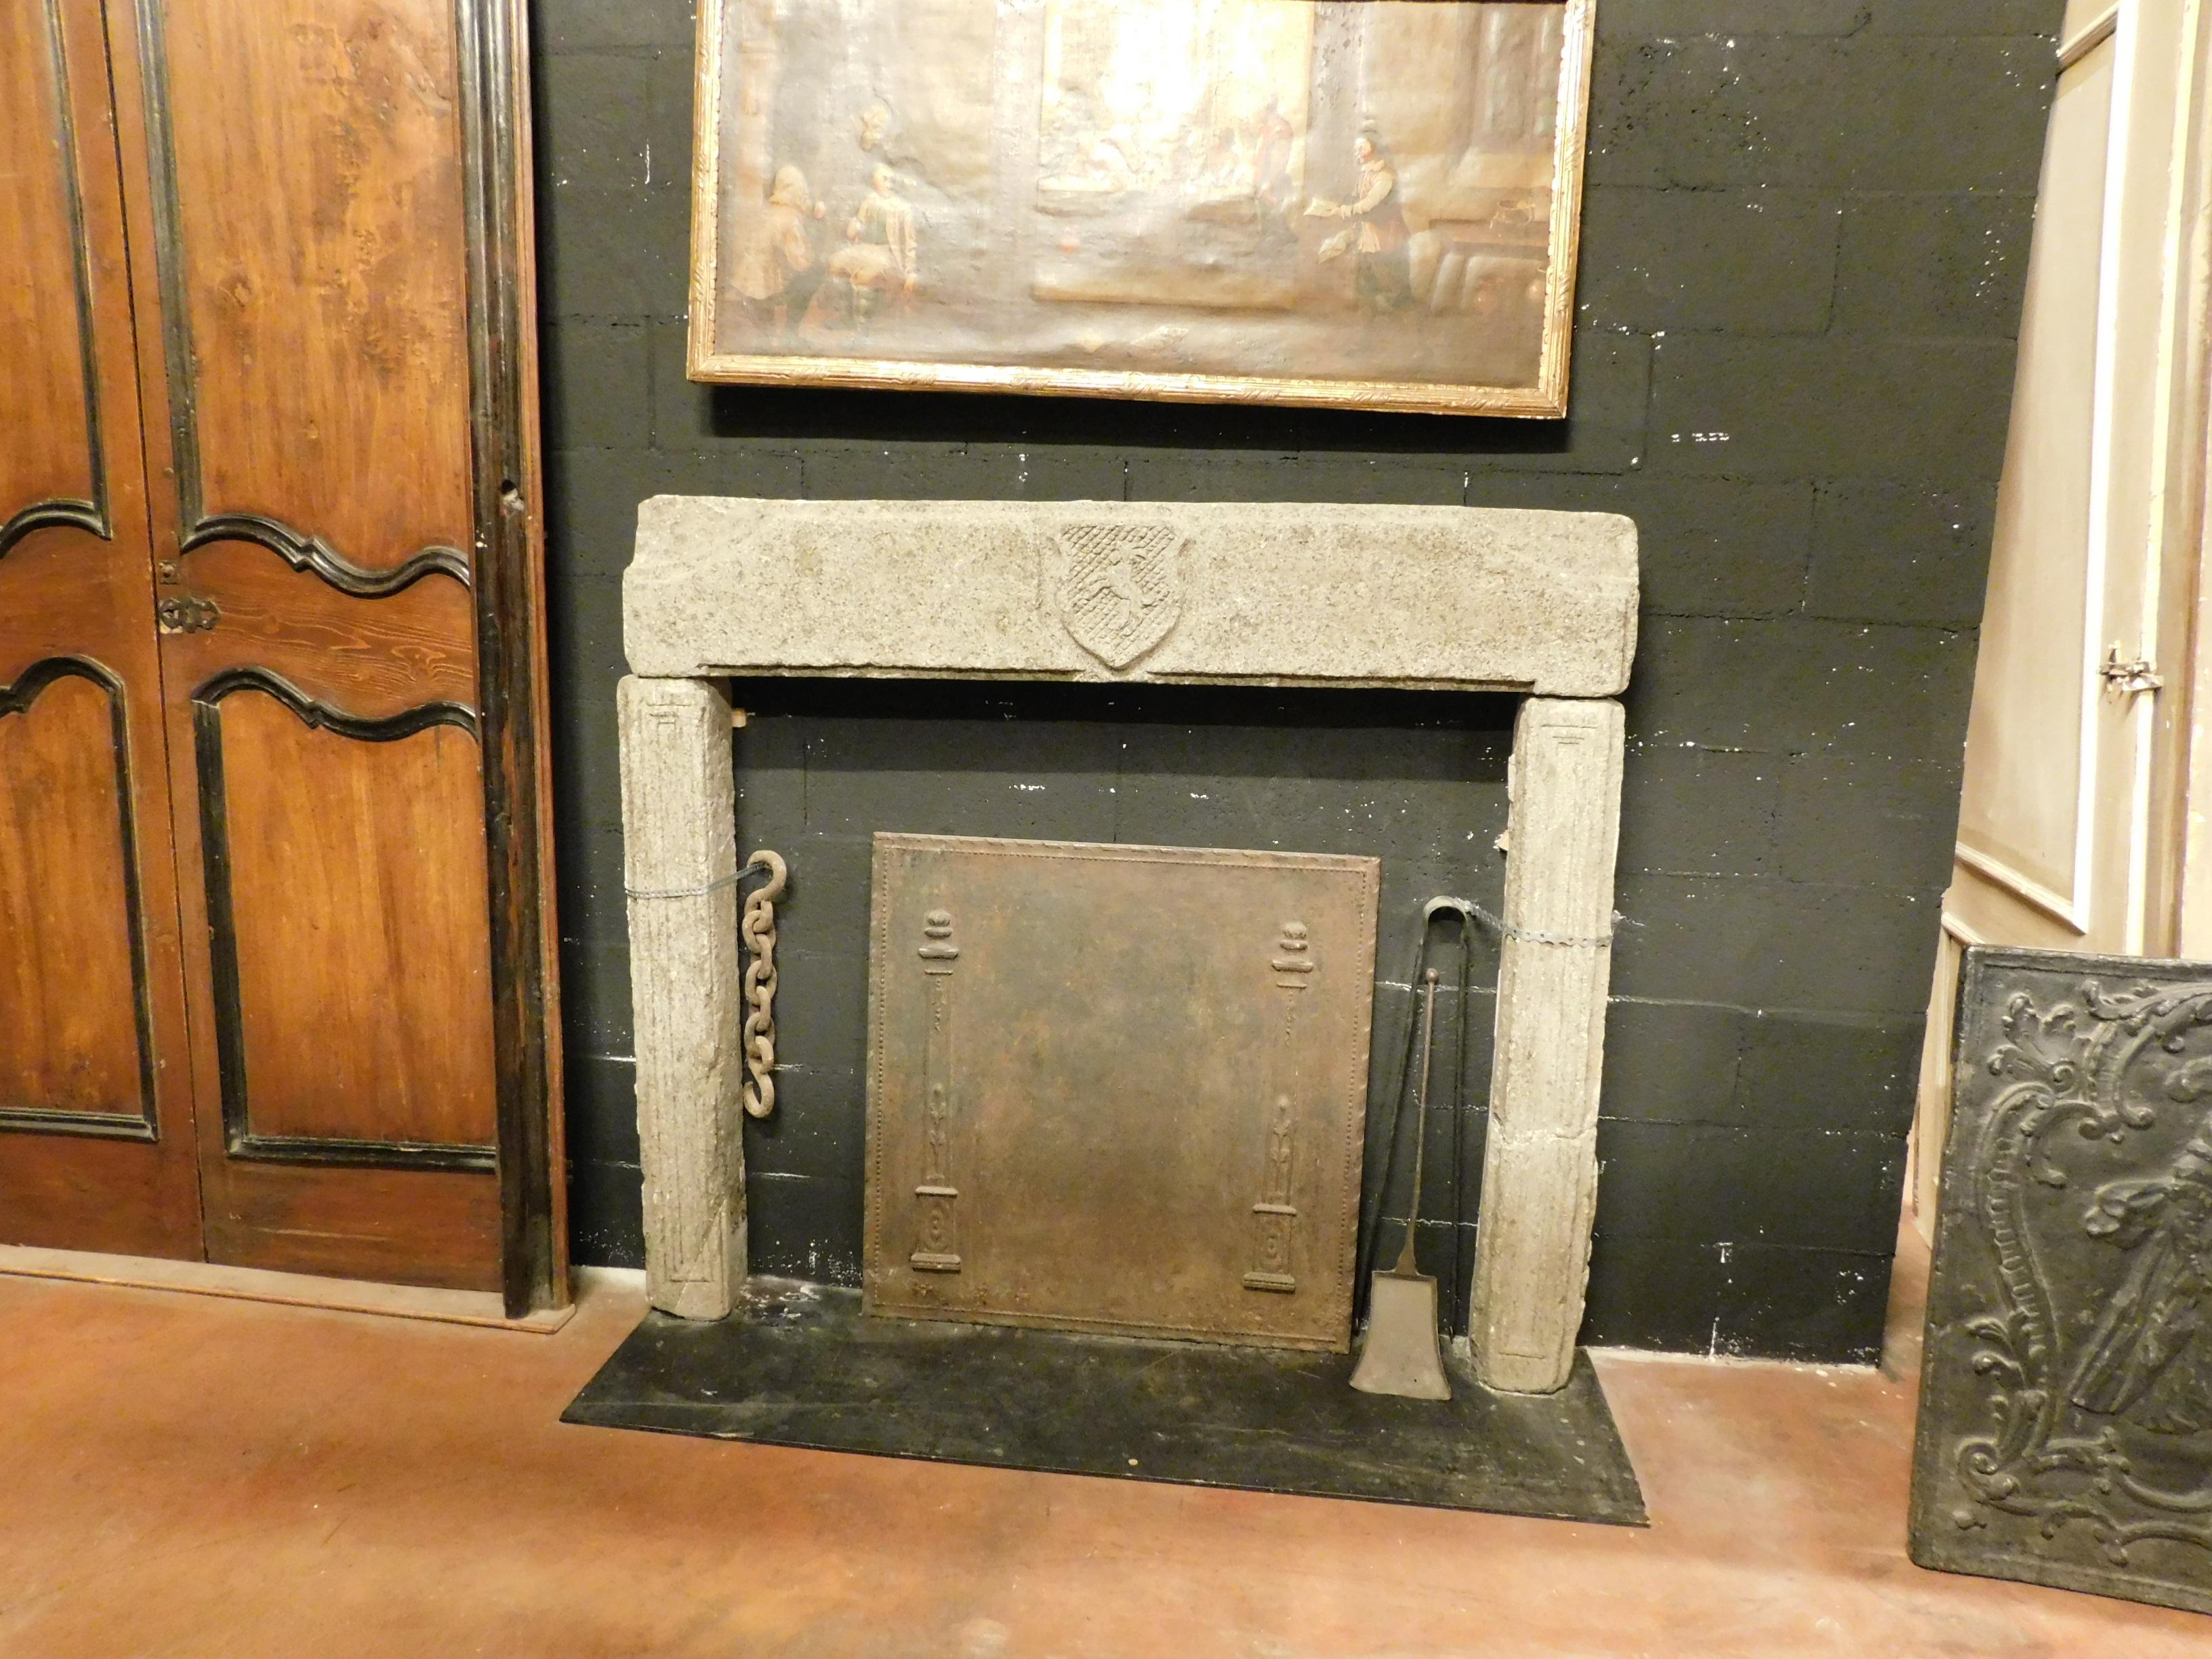 Antique sandstone fireplace mantel, with family crest carved by hand with animal symbol, elegant and refined even if in stone, suitable for both modern and rustic or mountain interiors.
External maximum size 147 cm wide, height 132 cm, thickness 15